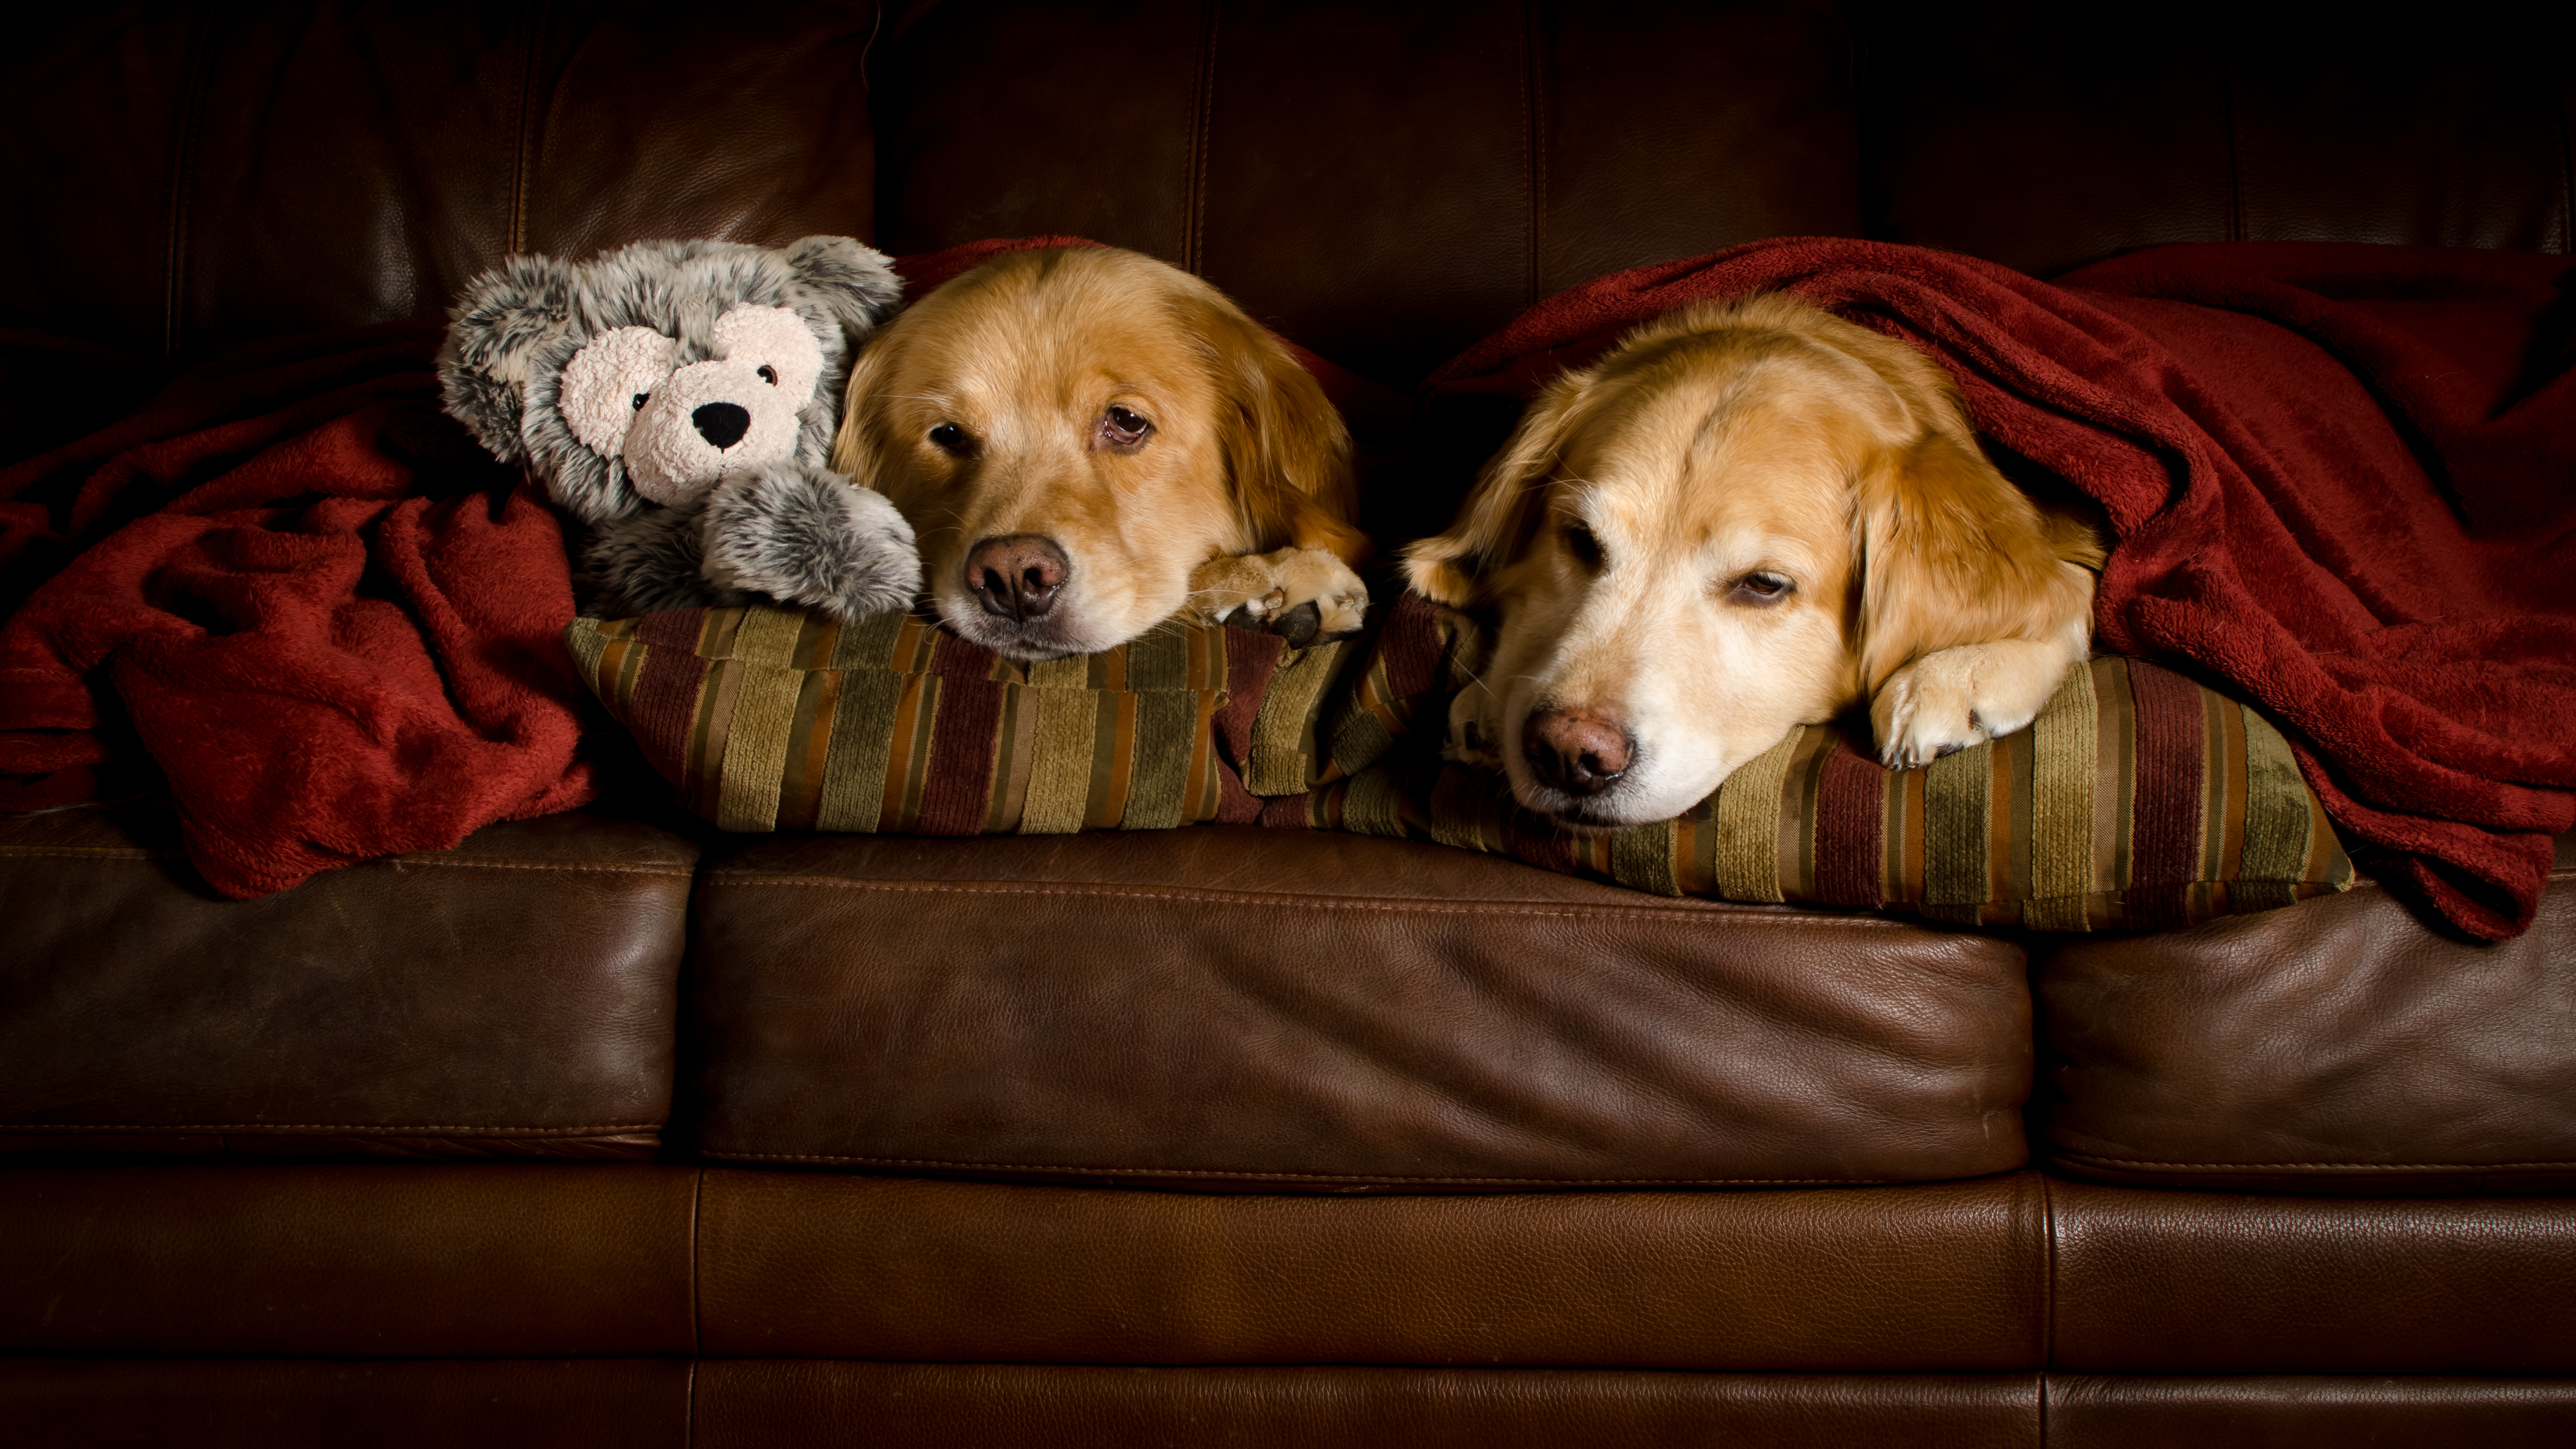 animal, golden retriever, couch, dog, puppy, stuffed animal, dogs